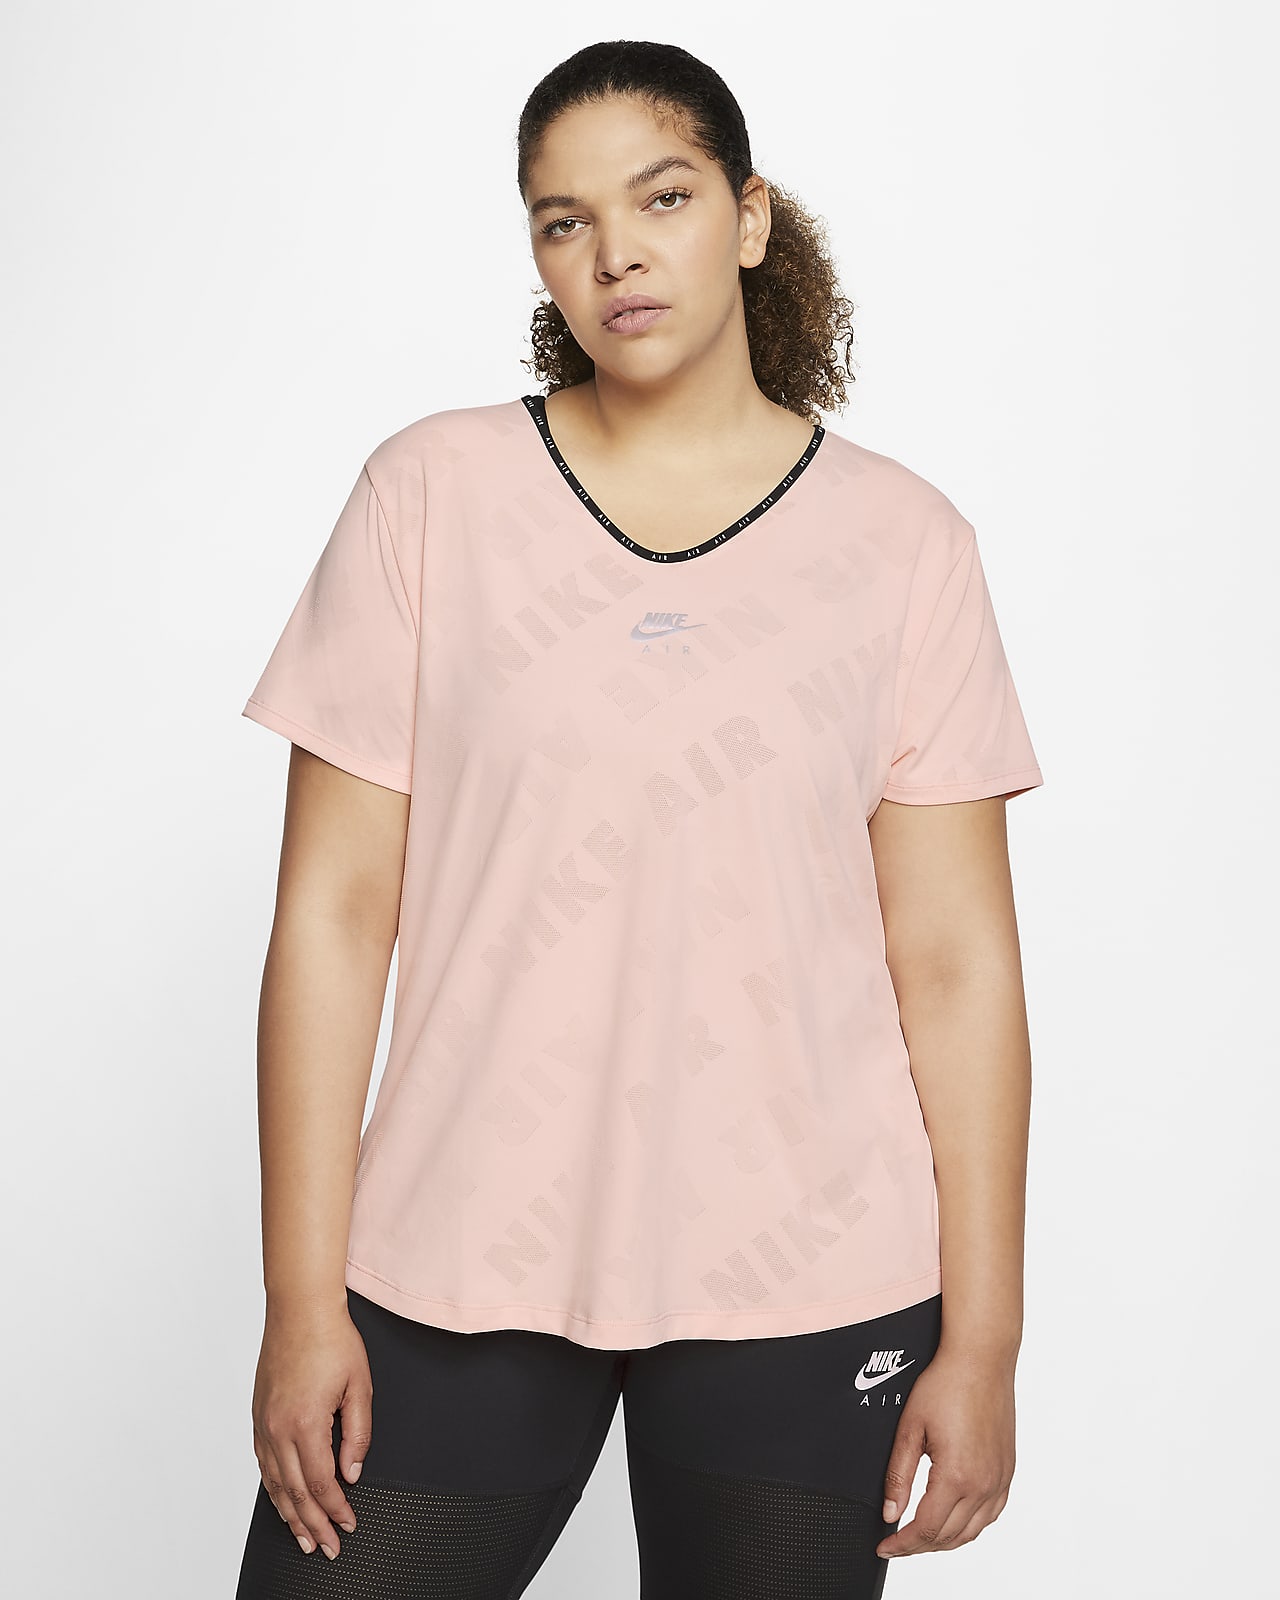 women's running top with phone pocket